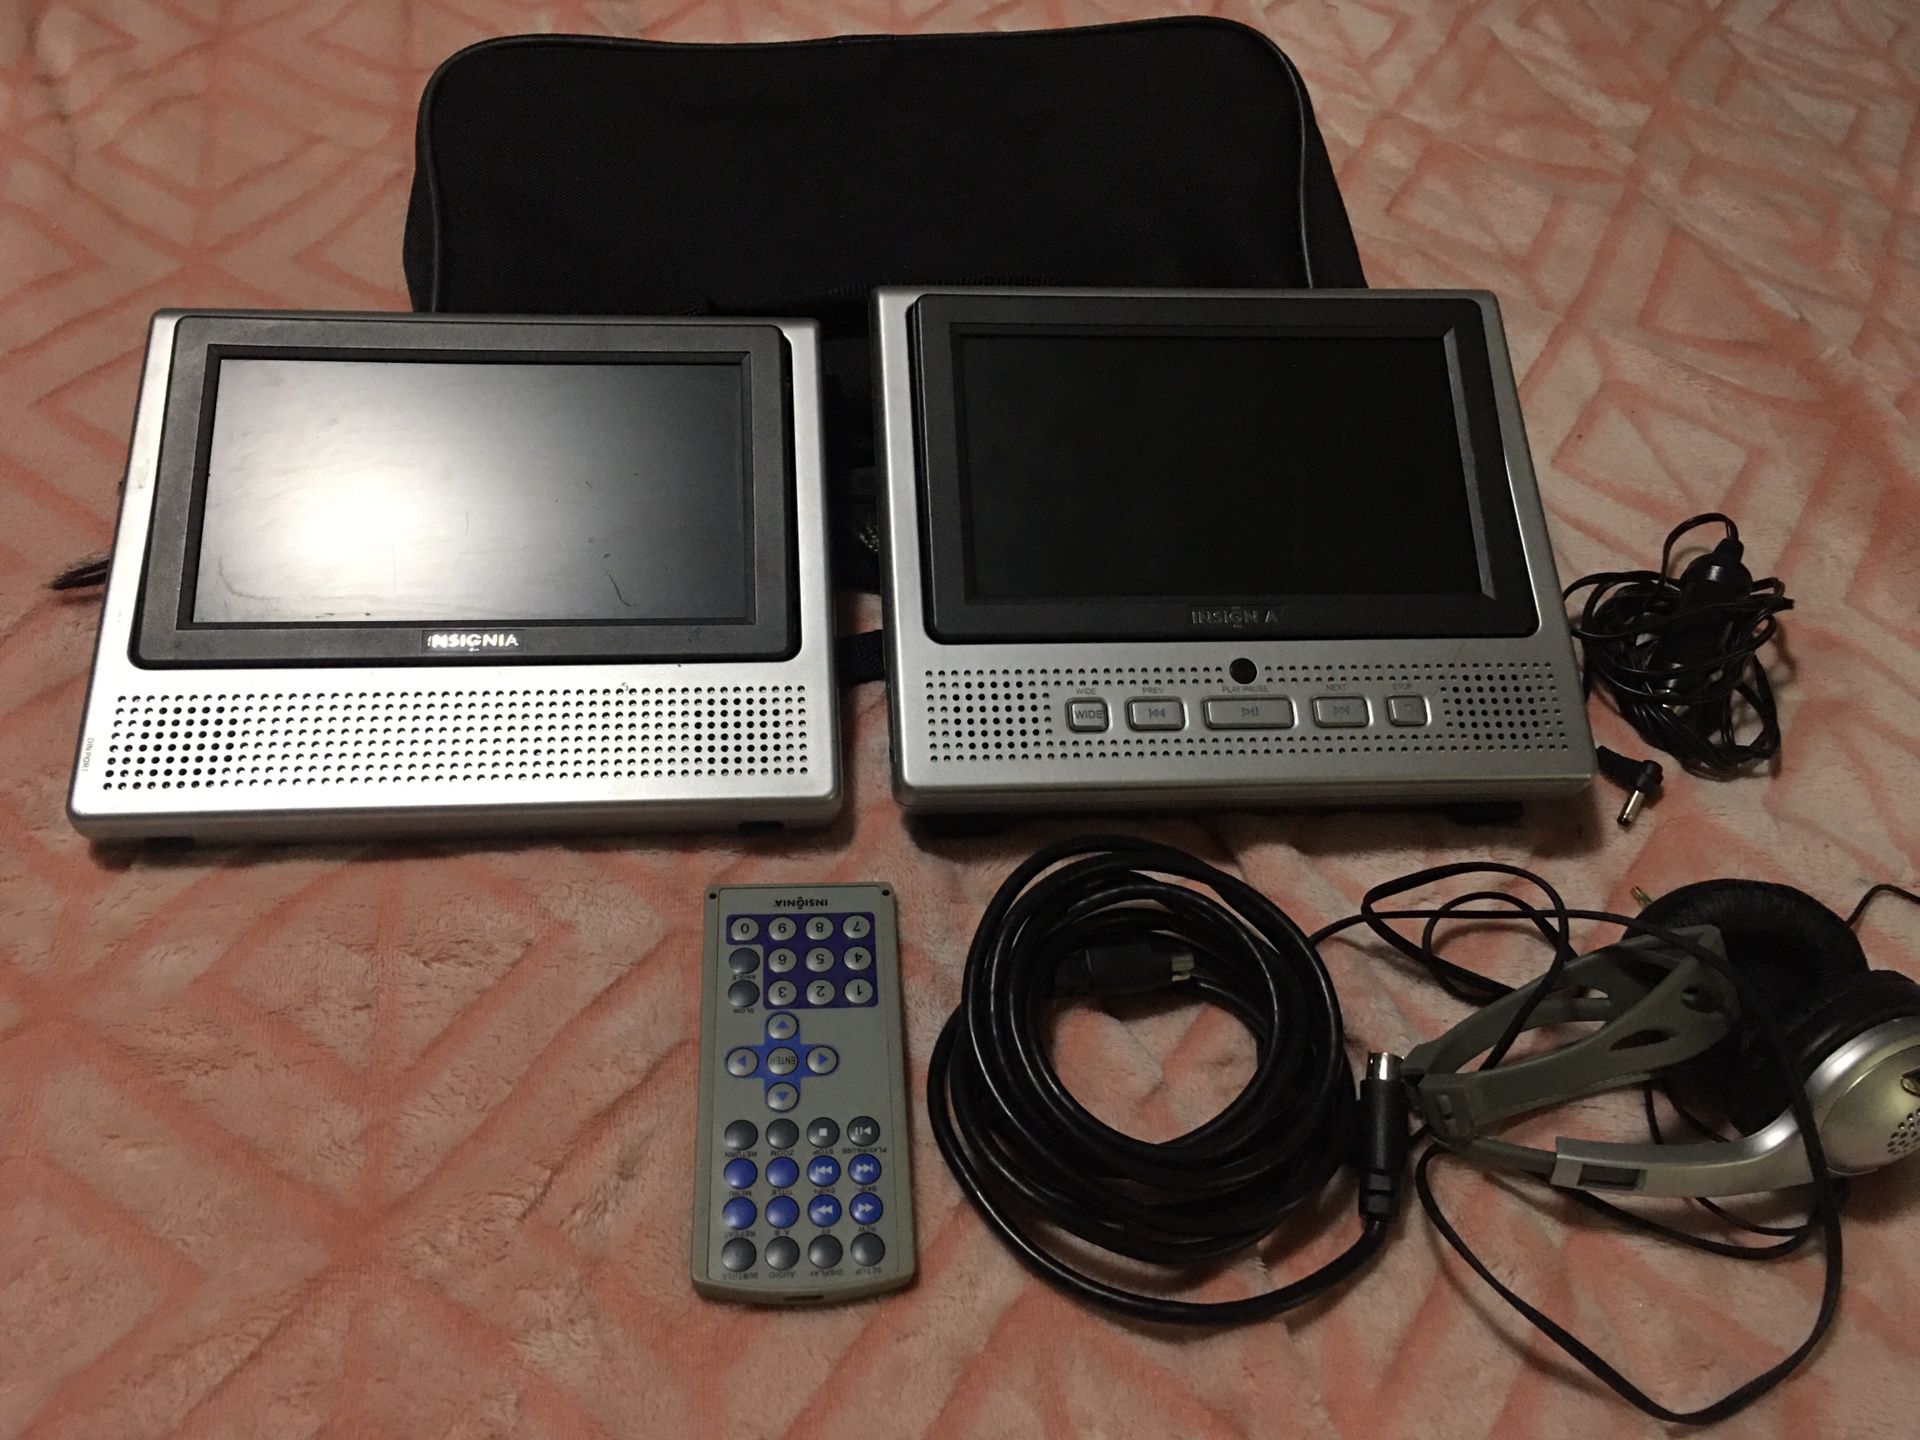 Portable DVD player for car